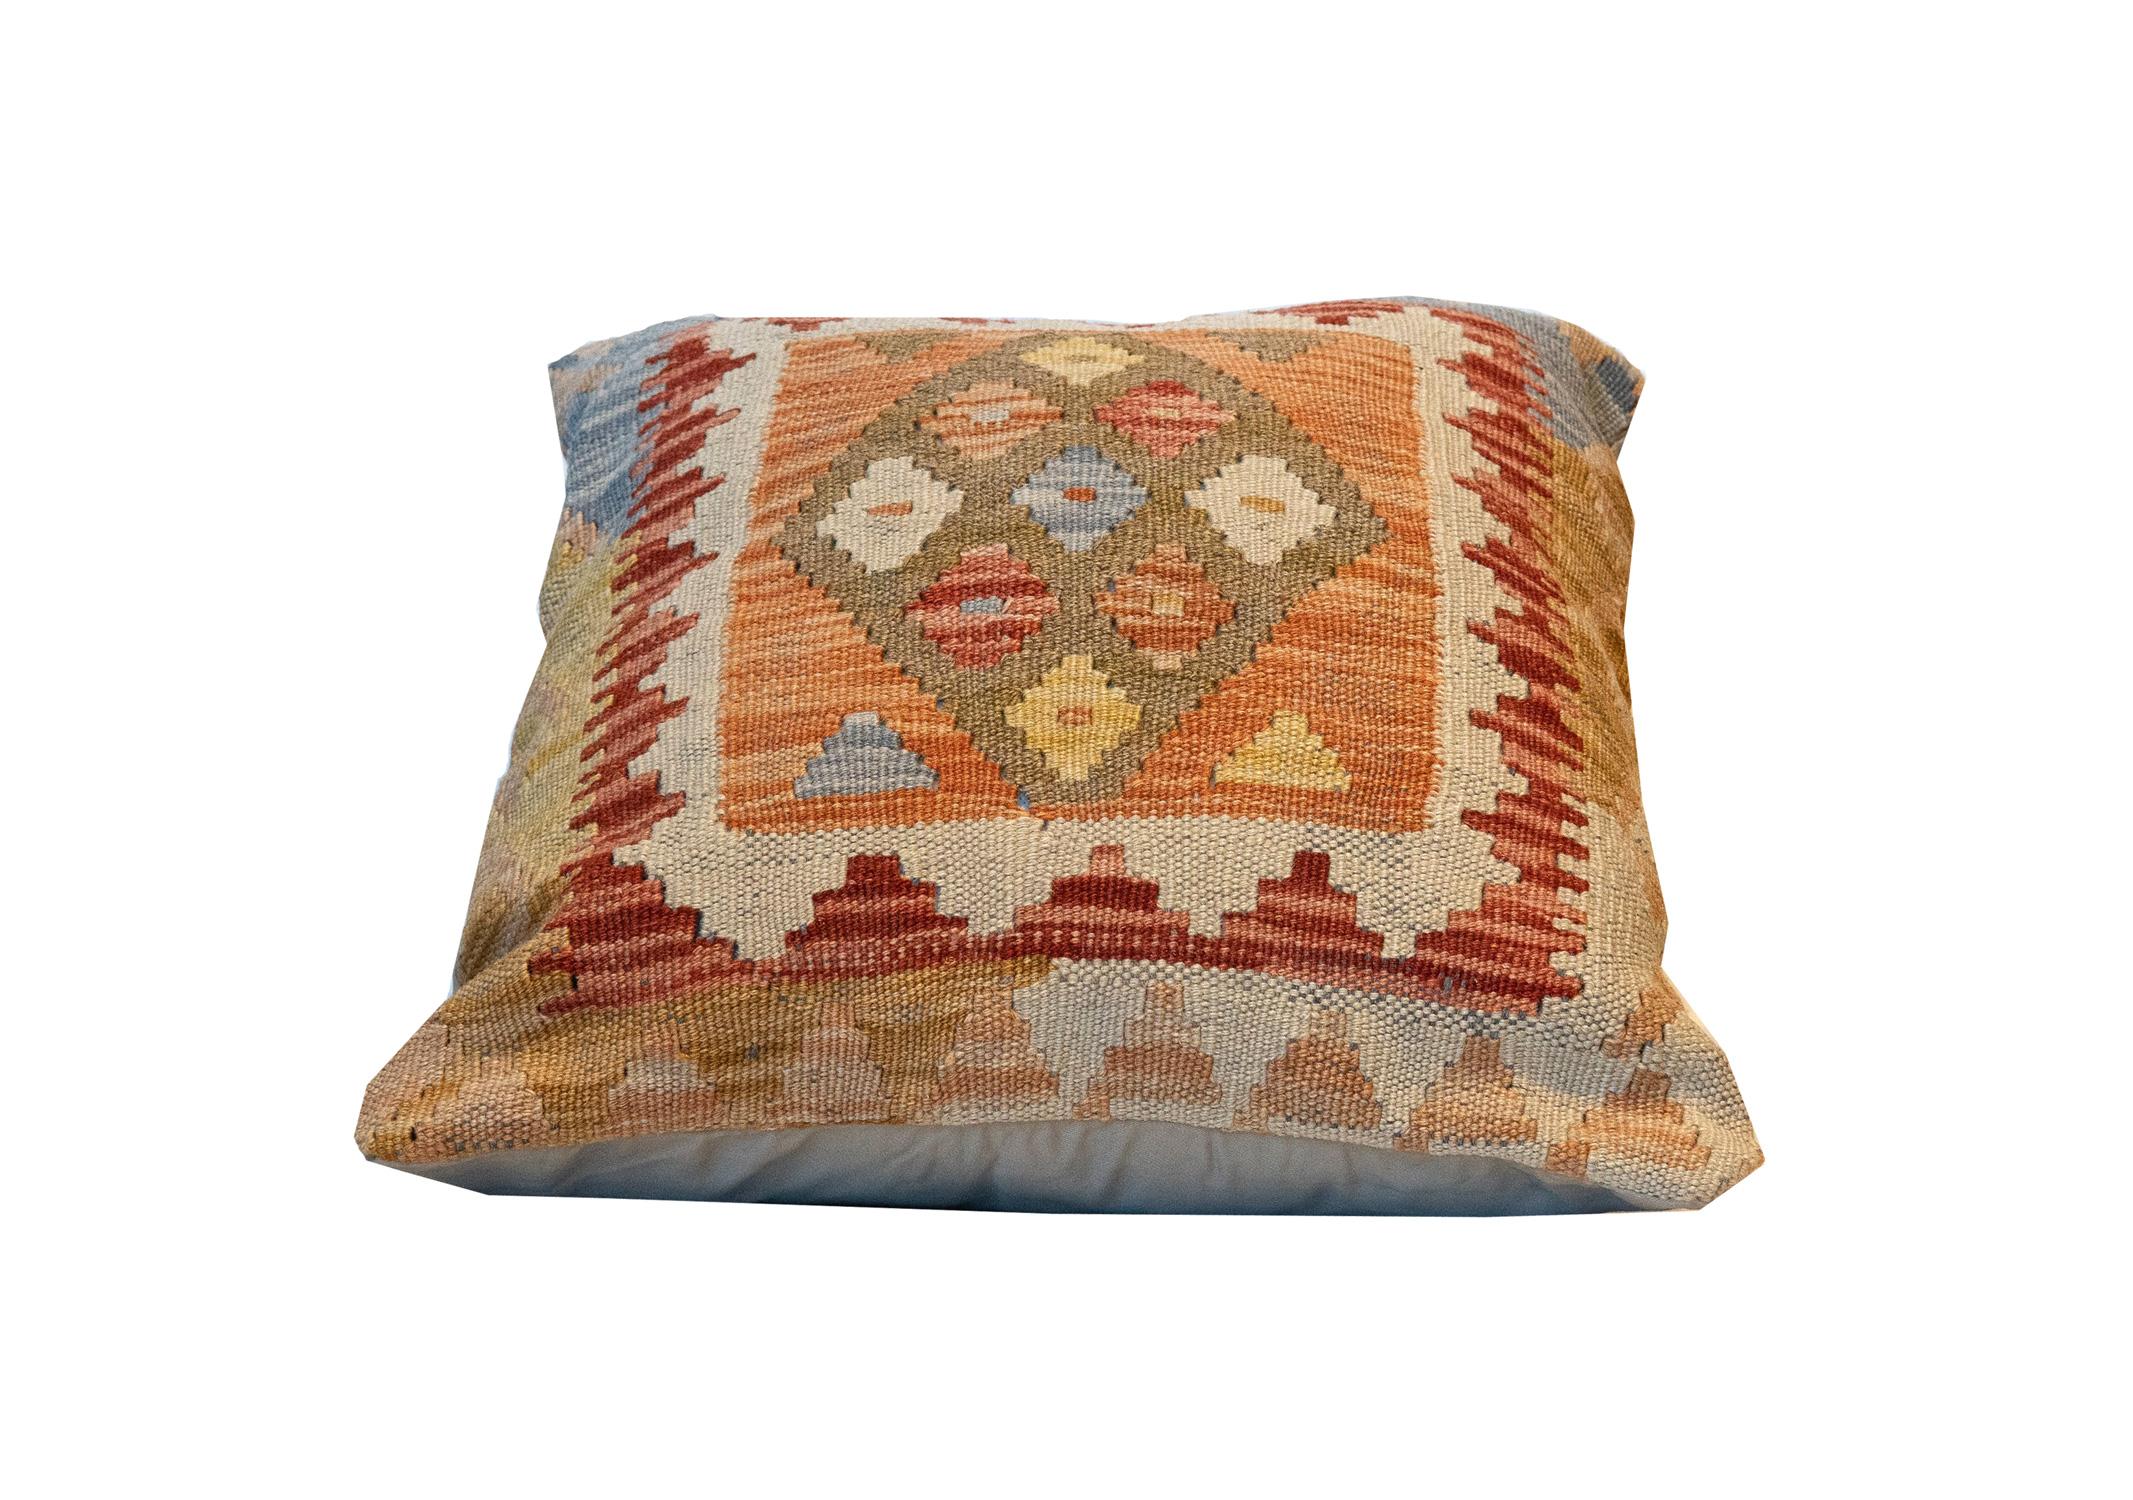 This truly unique geometric cushion cover is a handwoven kilim cushion cover woven in Afghanistan in the late 20th century/ early 21st century. Featuring a bold colour palette and geometric design made up of rust, brown, red and blue accents. Both